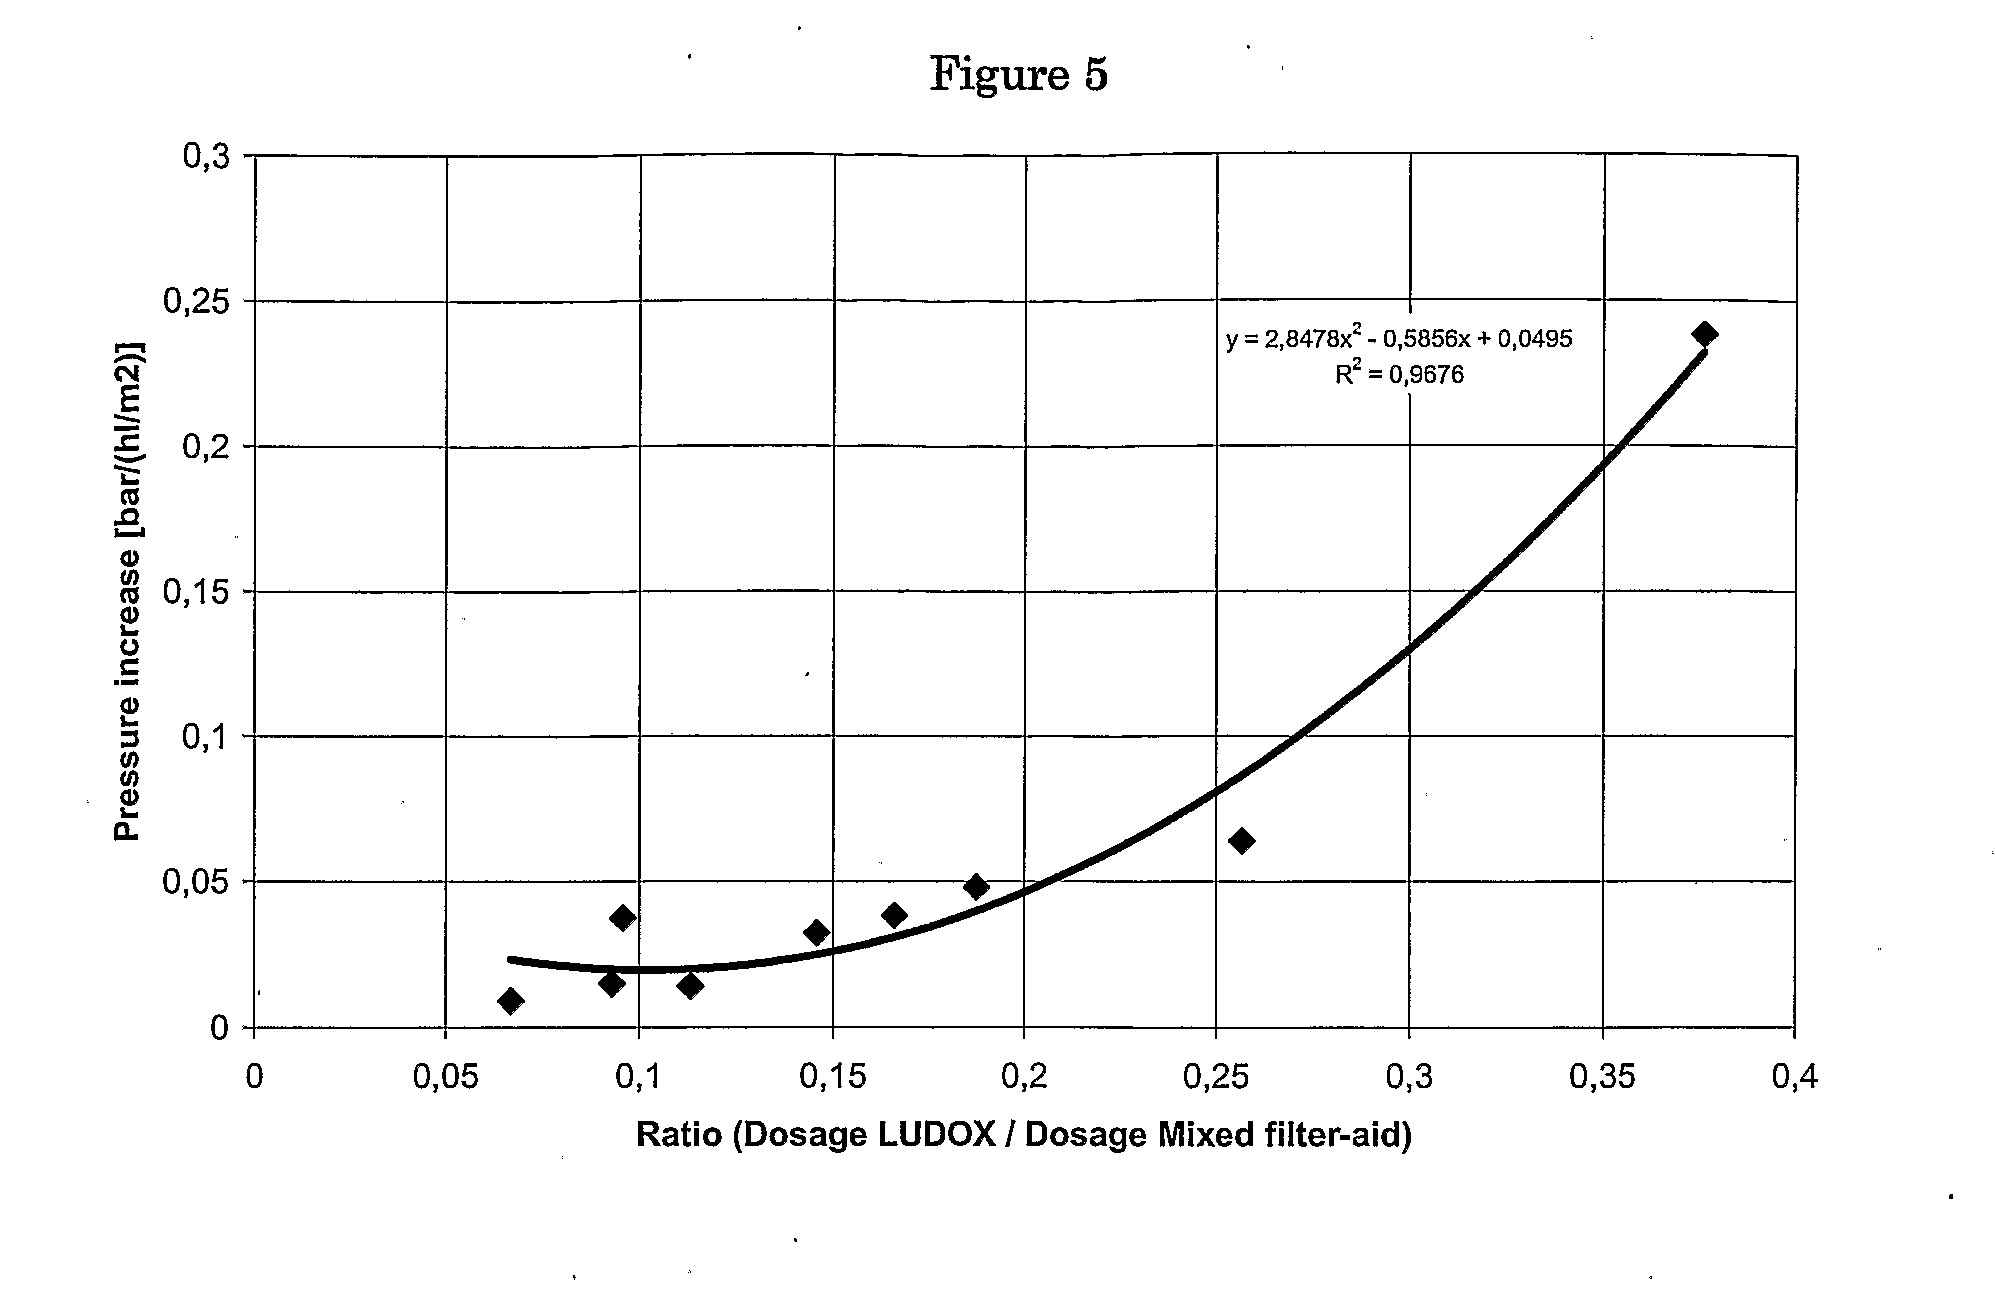 Method of Preparing a Liquid, Containing Proteins for Subsequent Separation, by Using One or More Protein-Complexing Agents